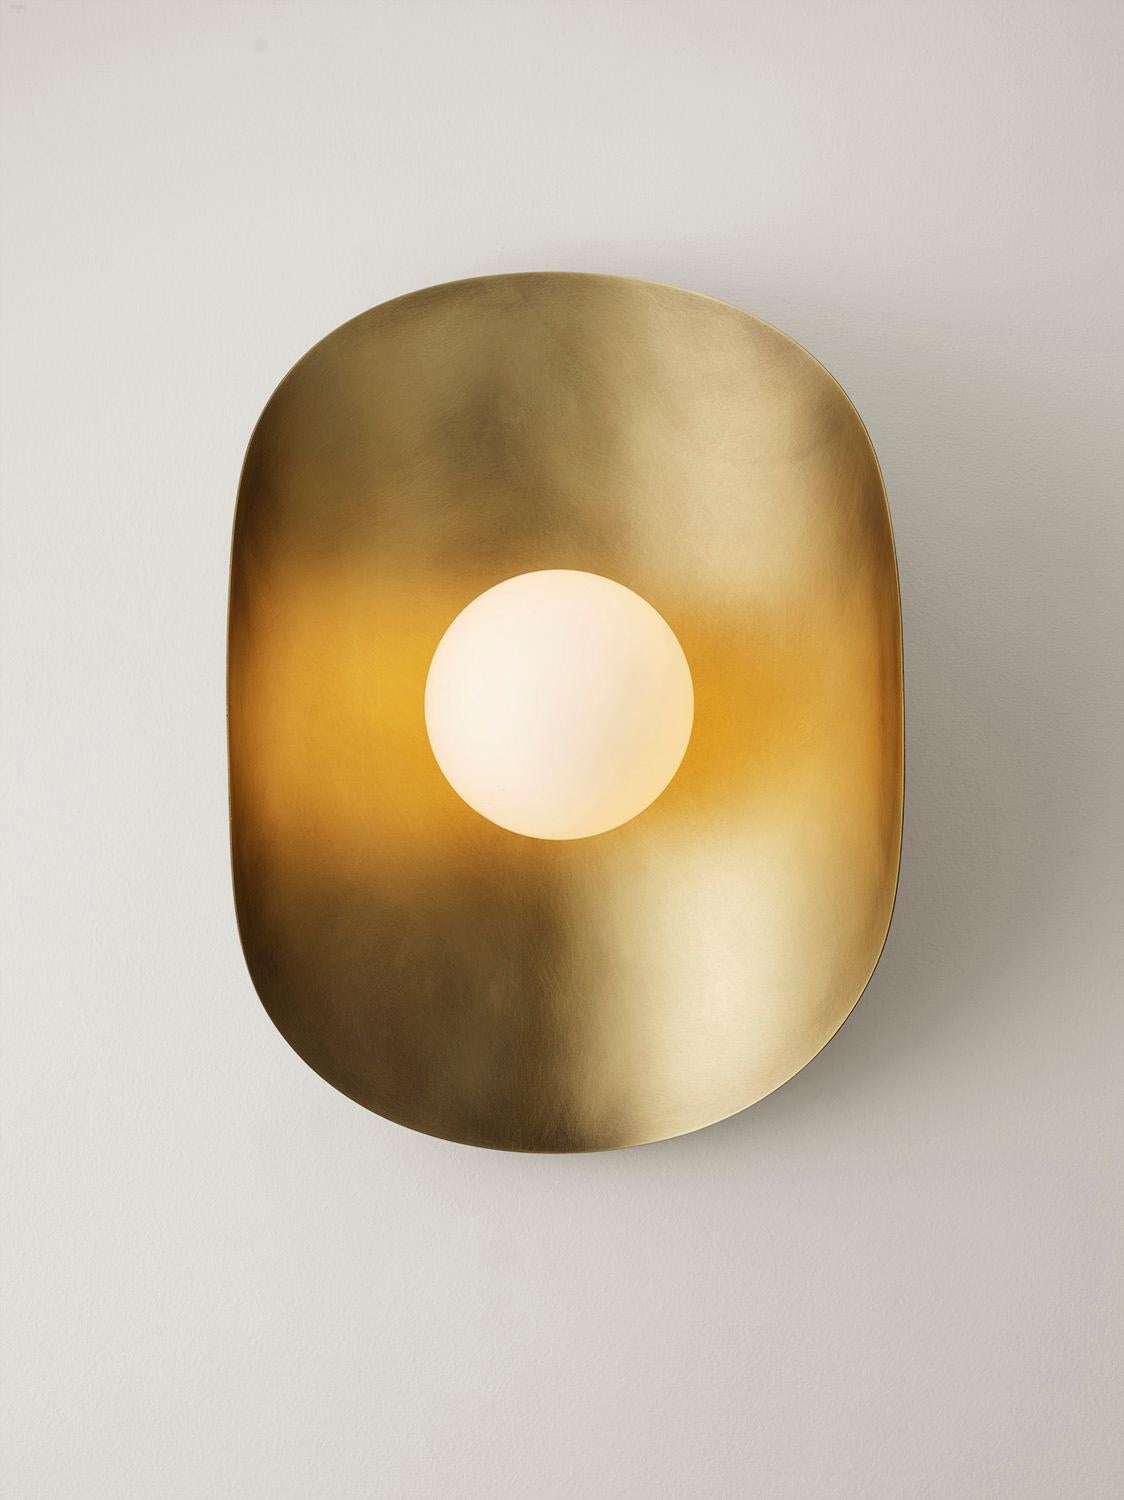 Introducing the Montera Wall Sconce or flushmount, a sleek and versatile addition to our collection. Unlike its pendant counterpart, this fixture foregoes the drop rod for a seamless integration into ceilings or walls. Its undulating, biomorphic